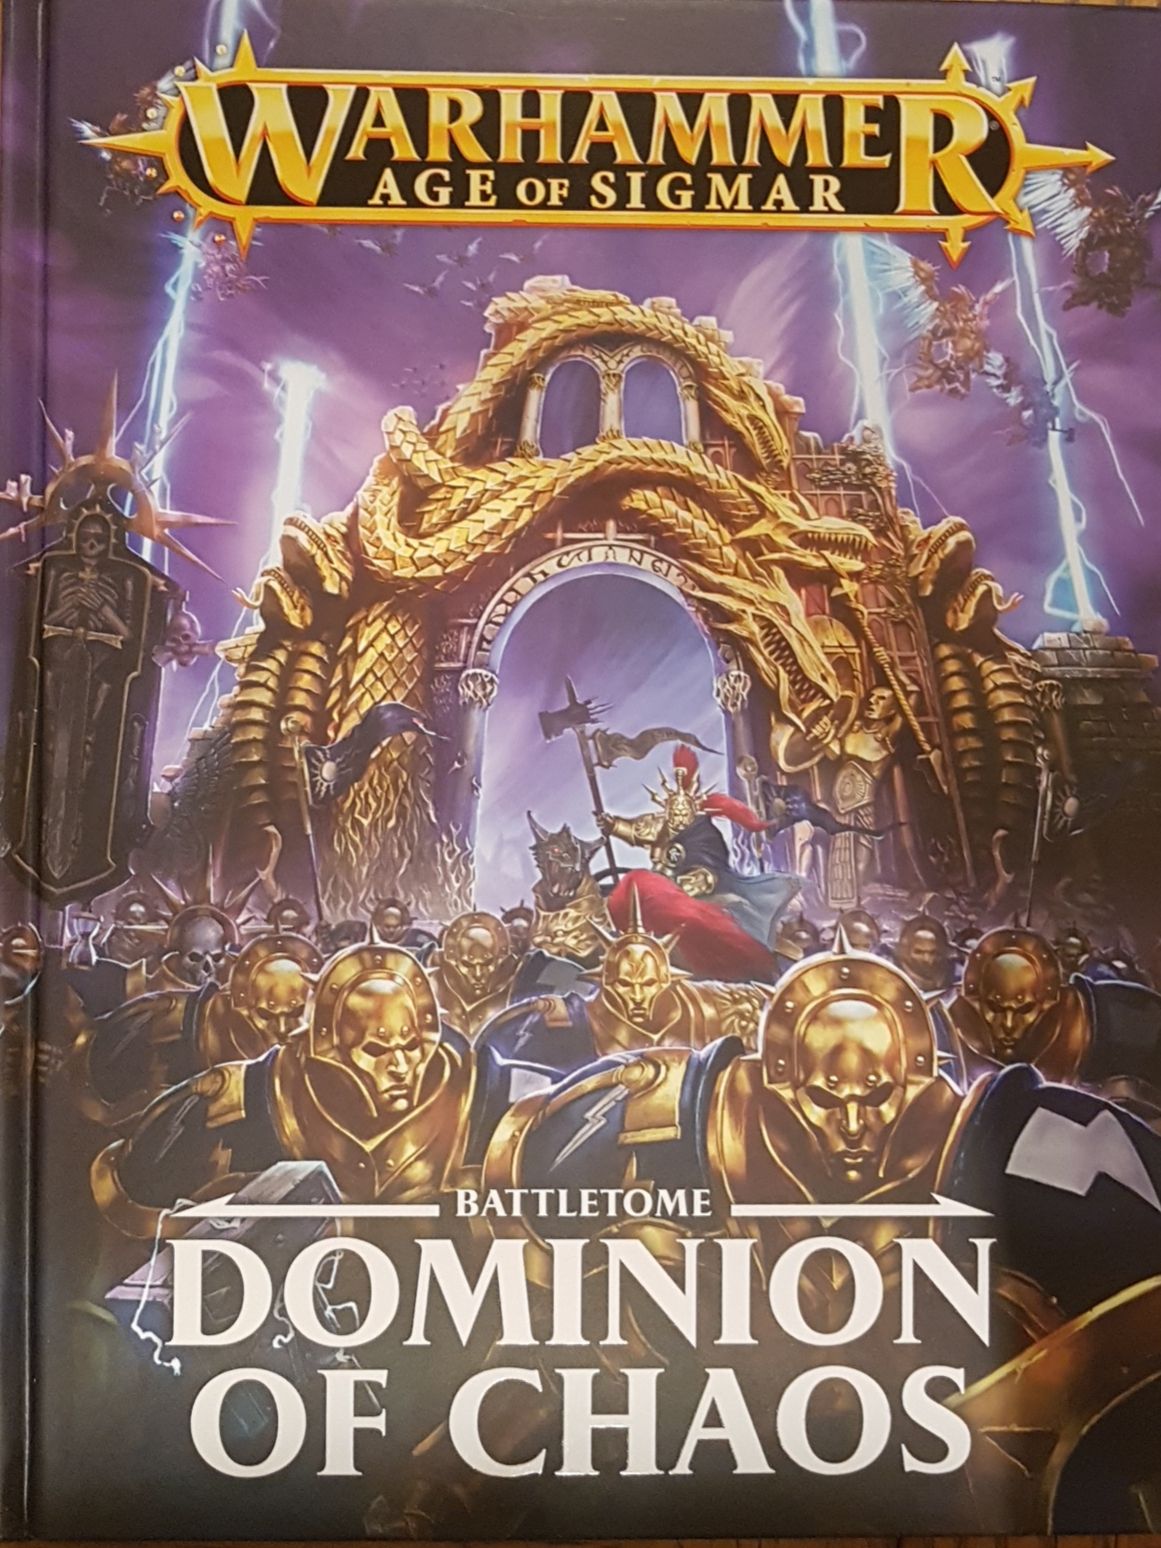 Warhammer Age of Sigmar: Battletome Dominion of Chaos